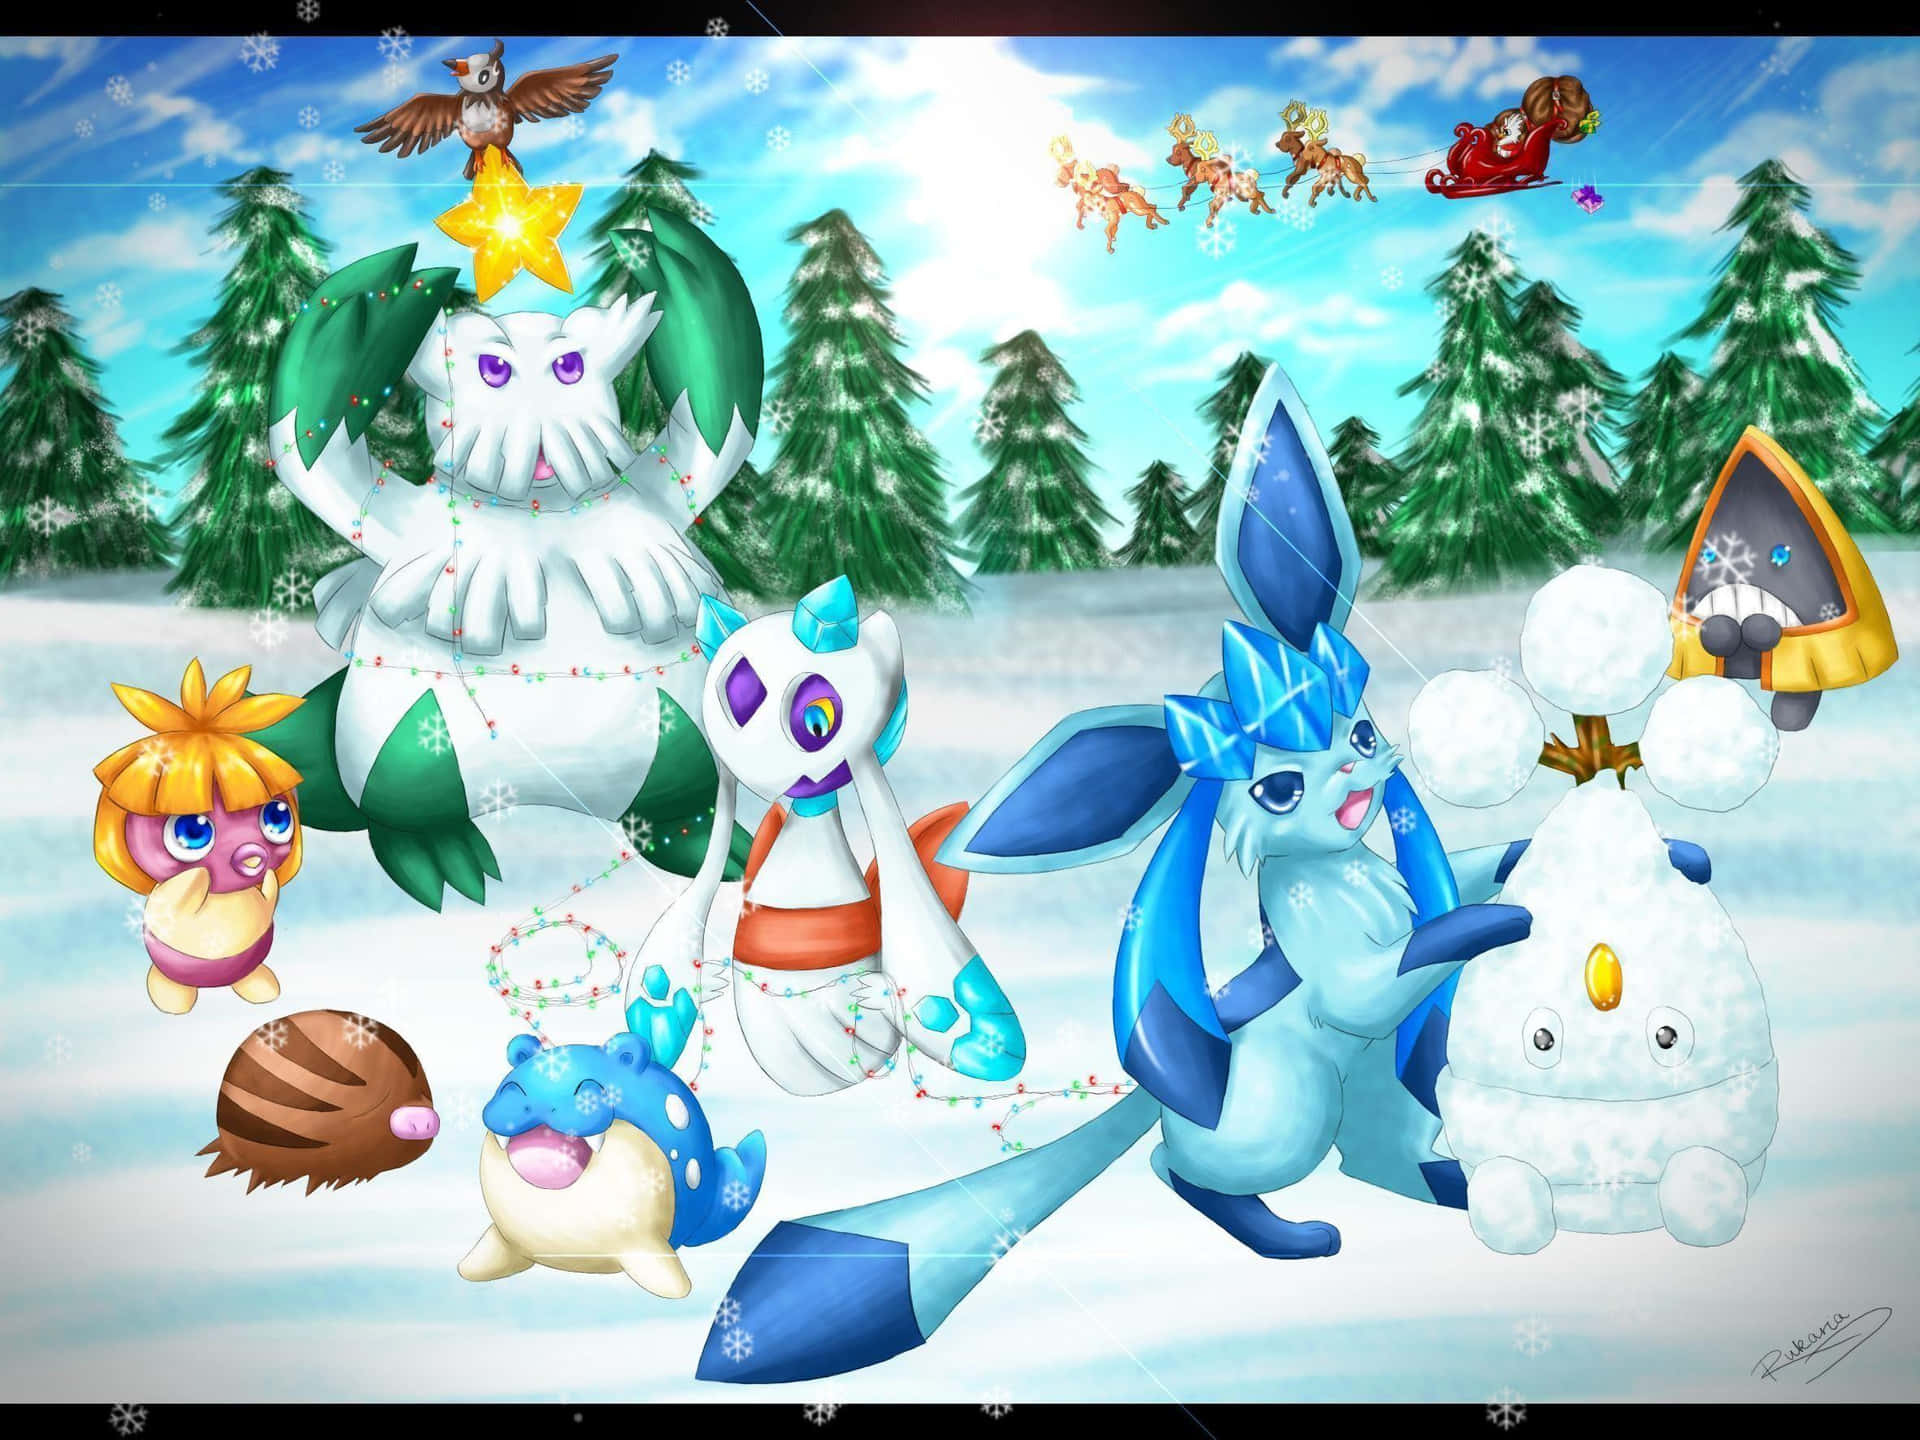 Don't forget about your Christmas list for Santa - include your favorite Pokemon! Wallpaper